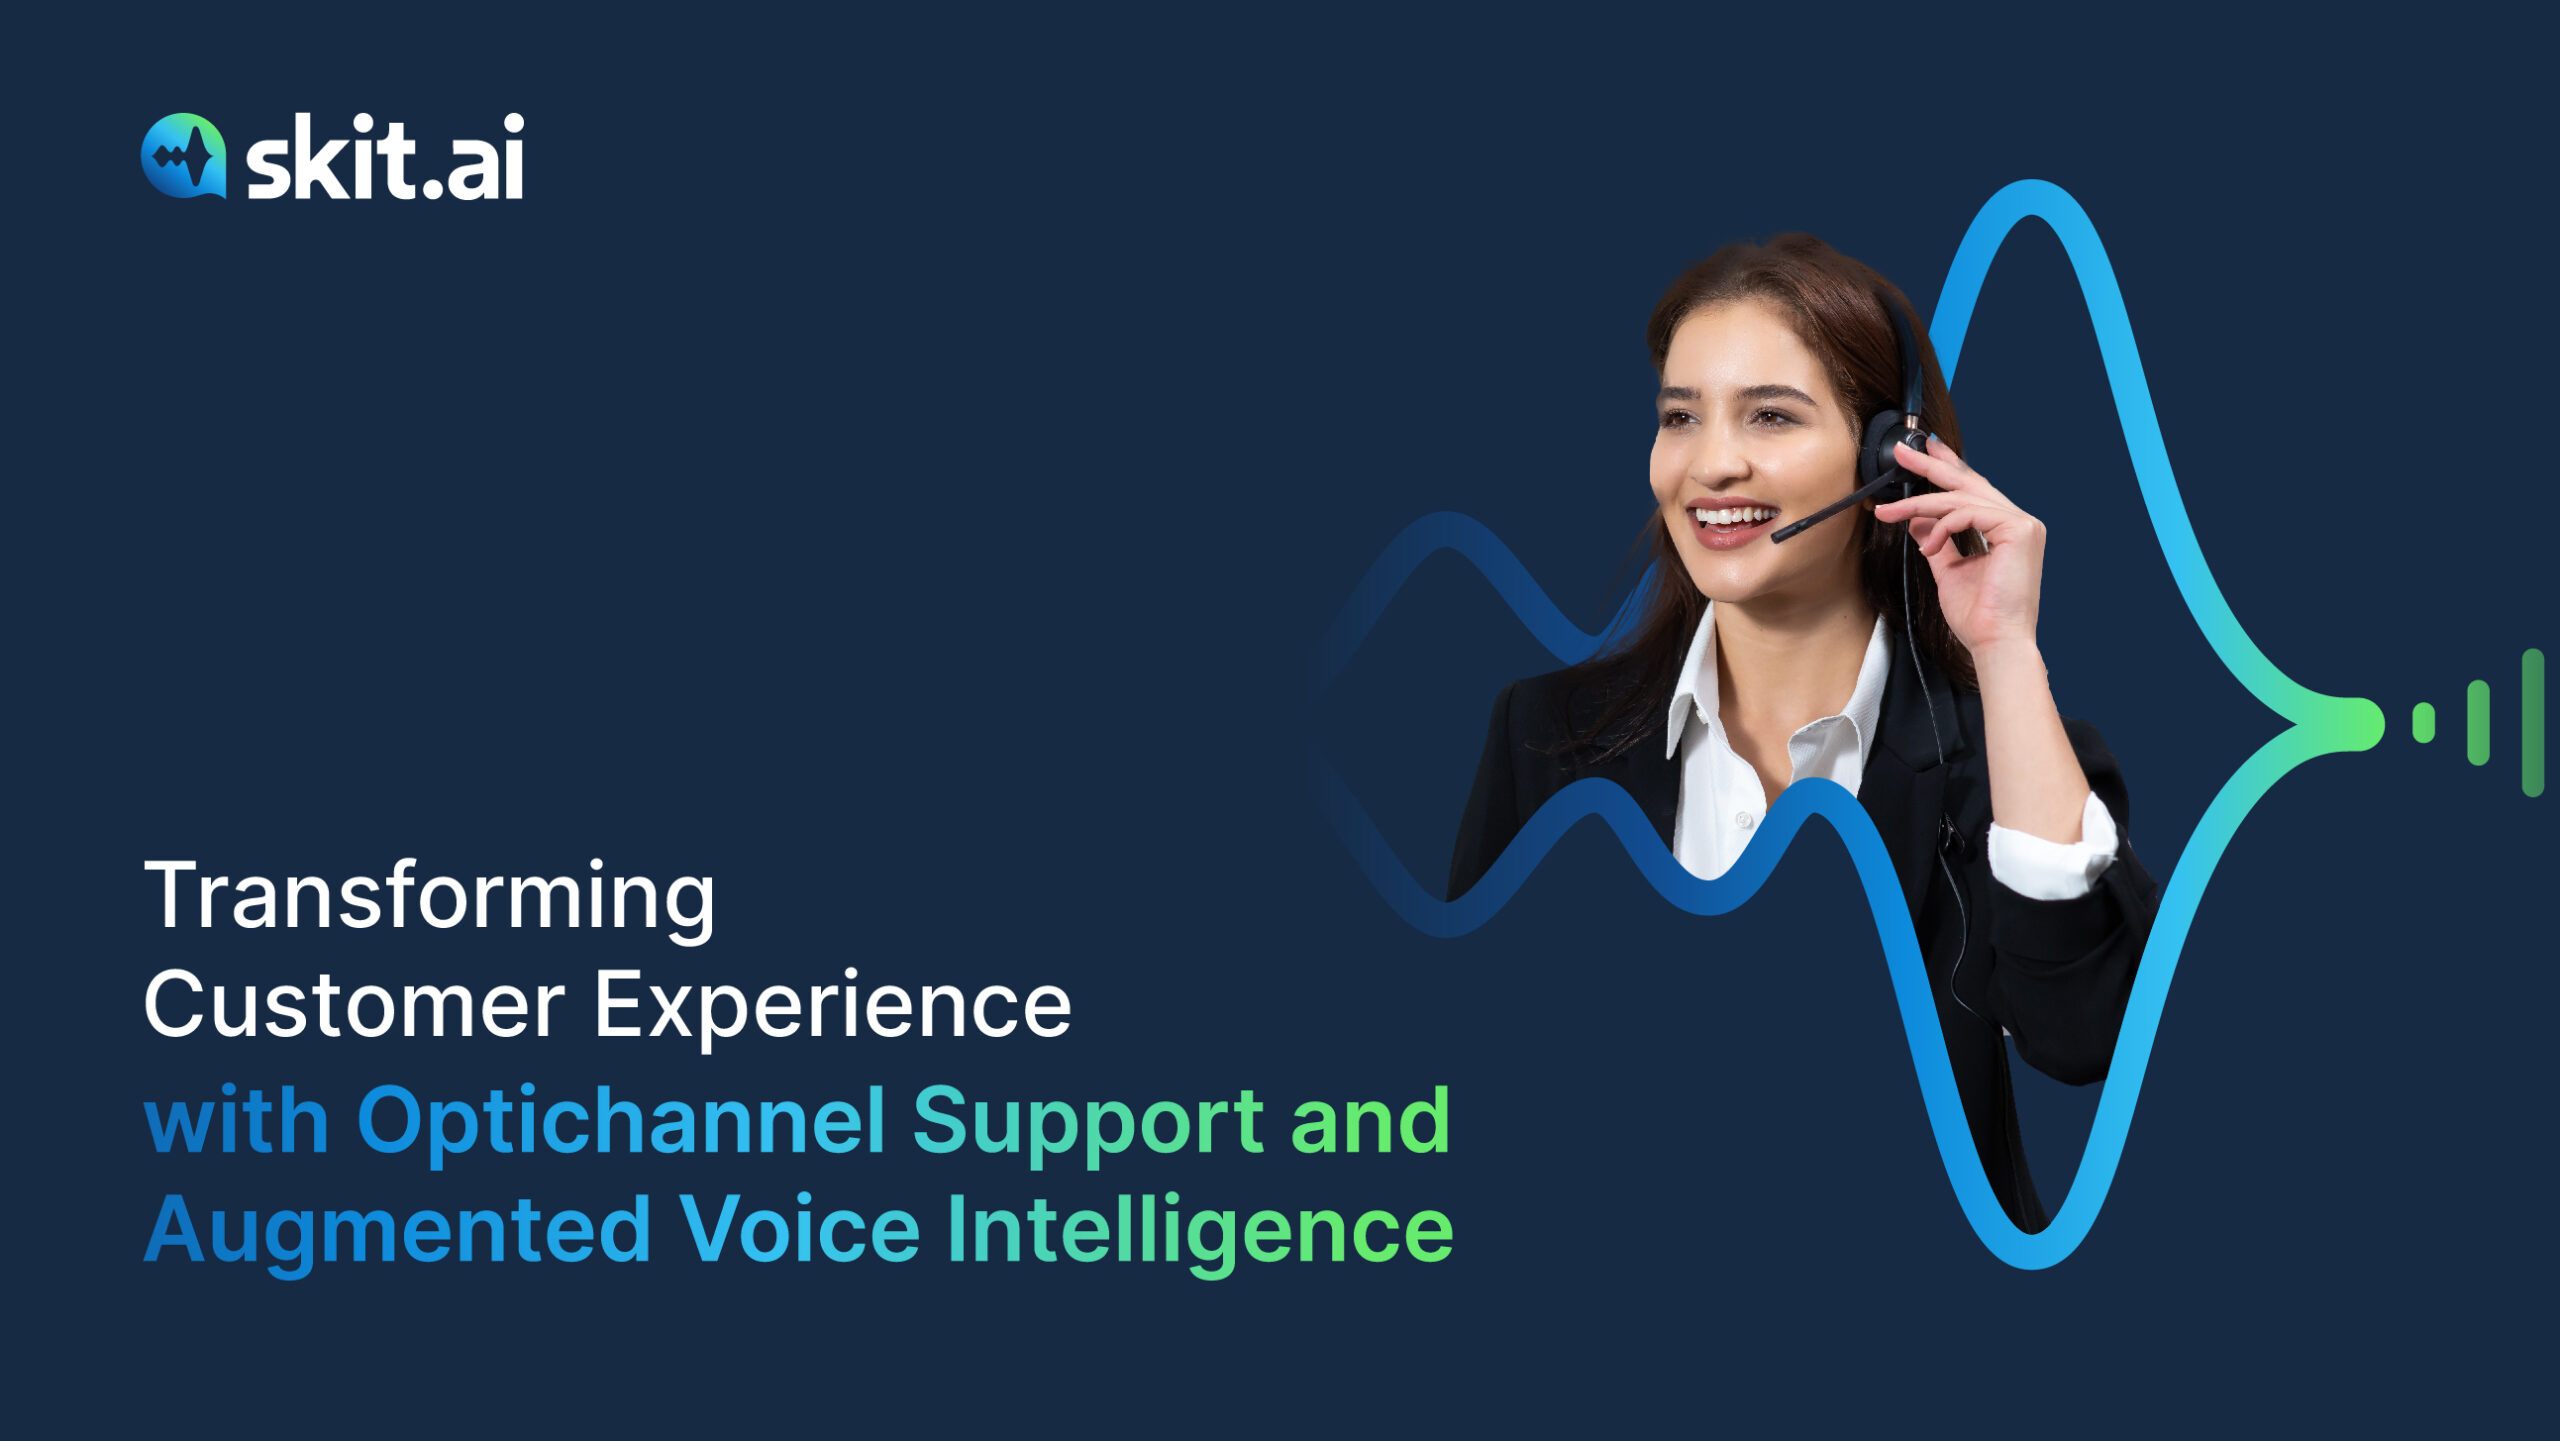 Transforming Customer Experience with Optichannel Support and Augmented Voice Intelligence